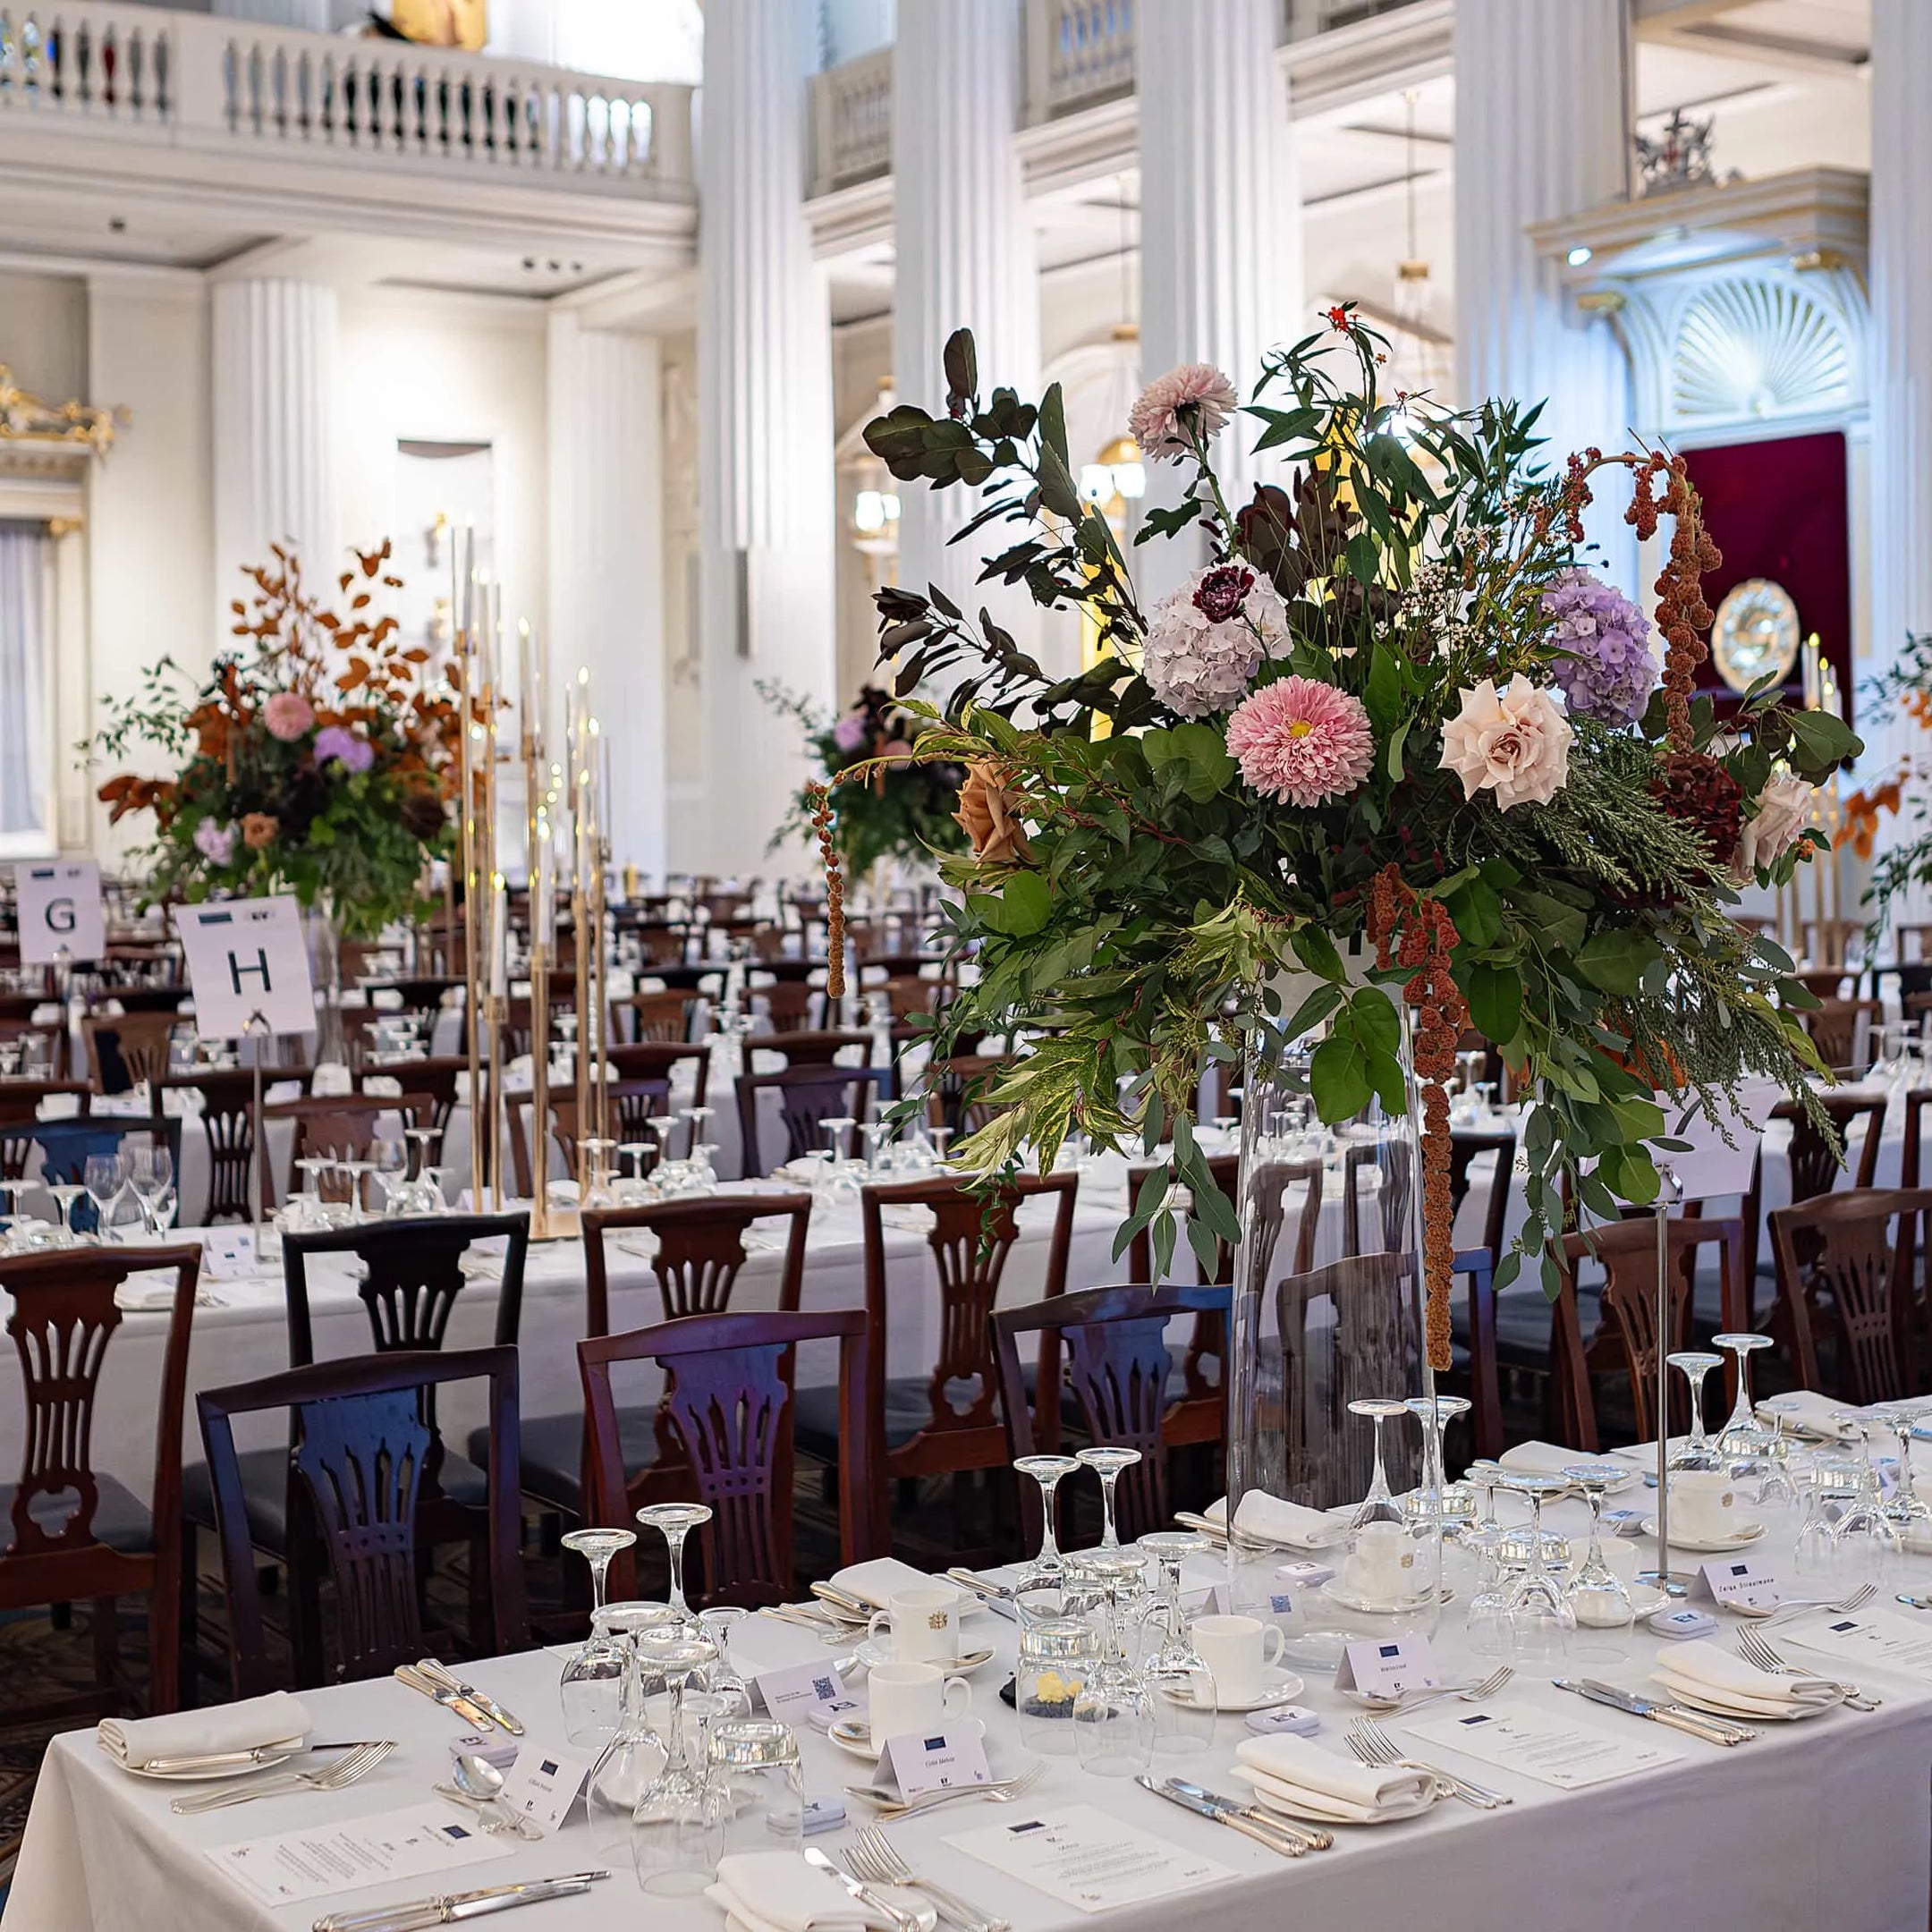 Bespoke arrangements in tall vases, made to captivate the elegantly of the decorated dining room